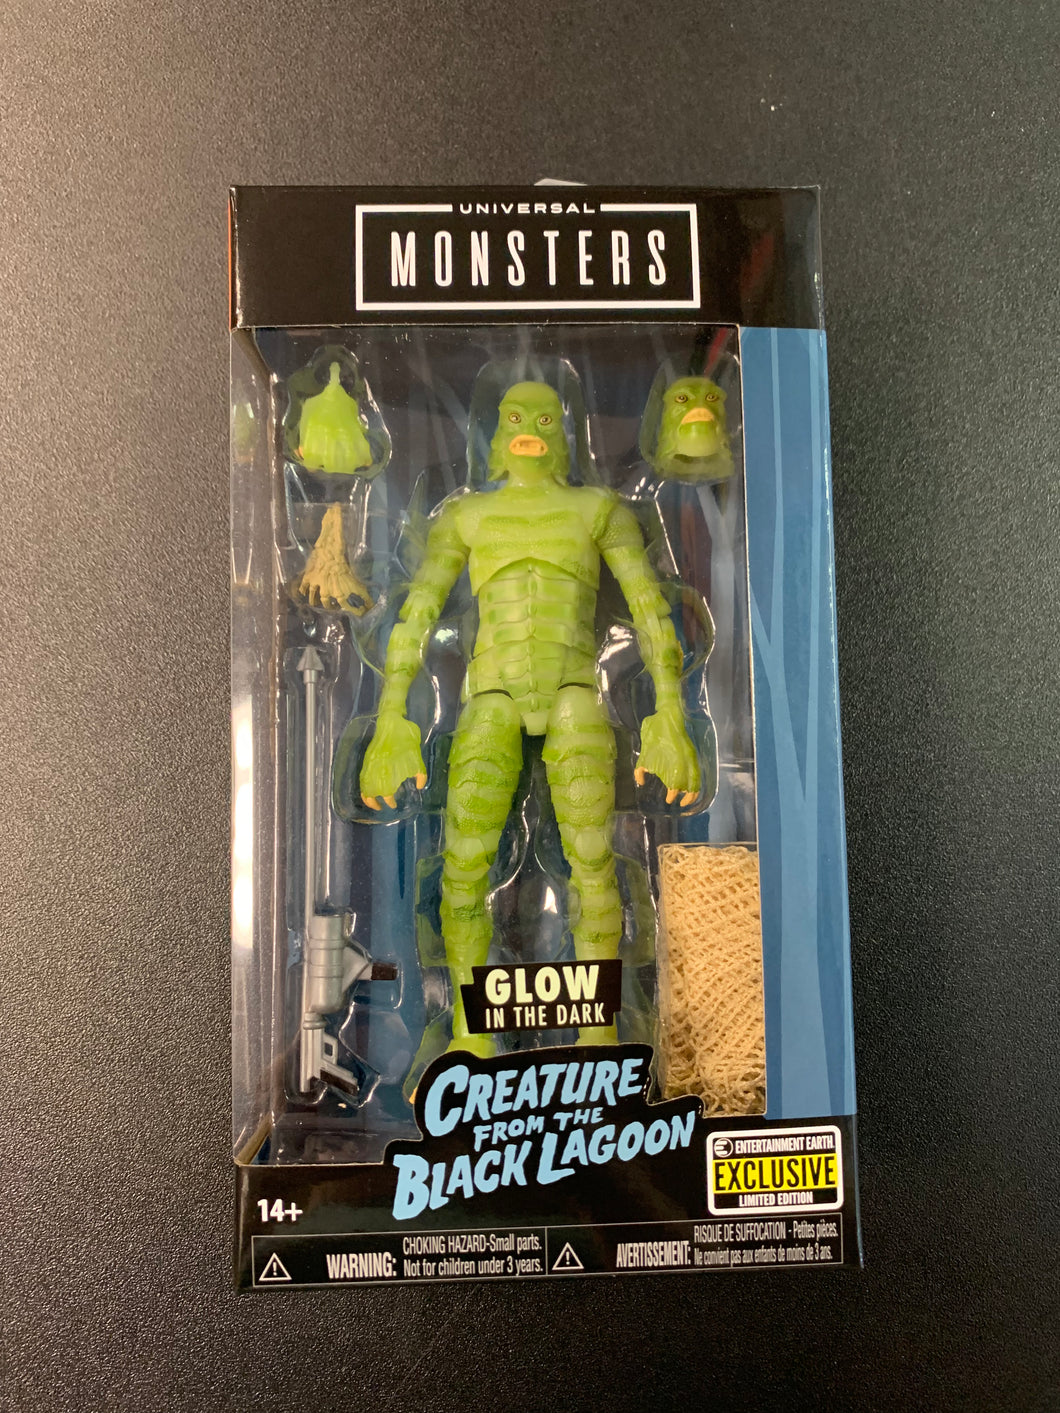 UNIVERSAL MONSTERS GLOW IN THE DARK CREATURE FROM THE BLACK LAGOON 6” FIGURE